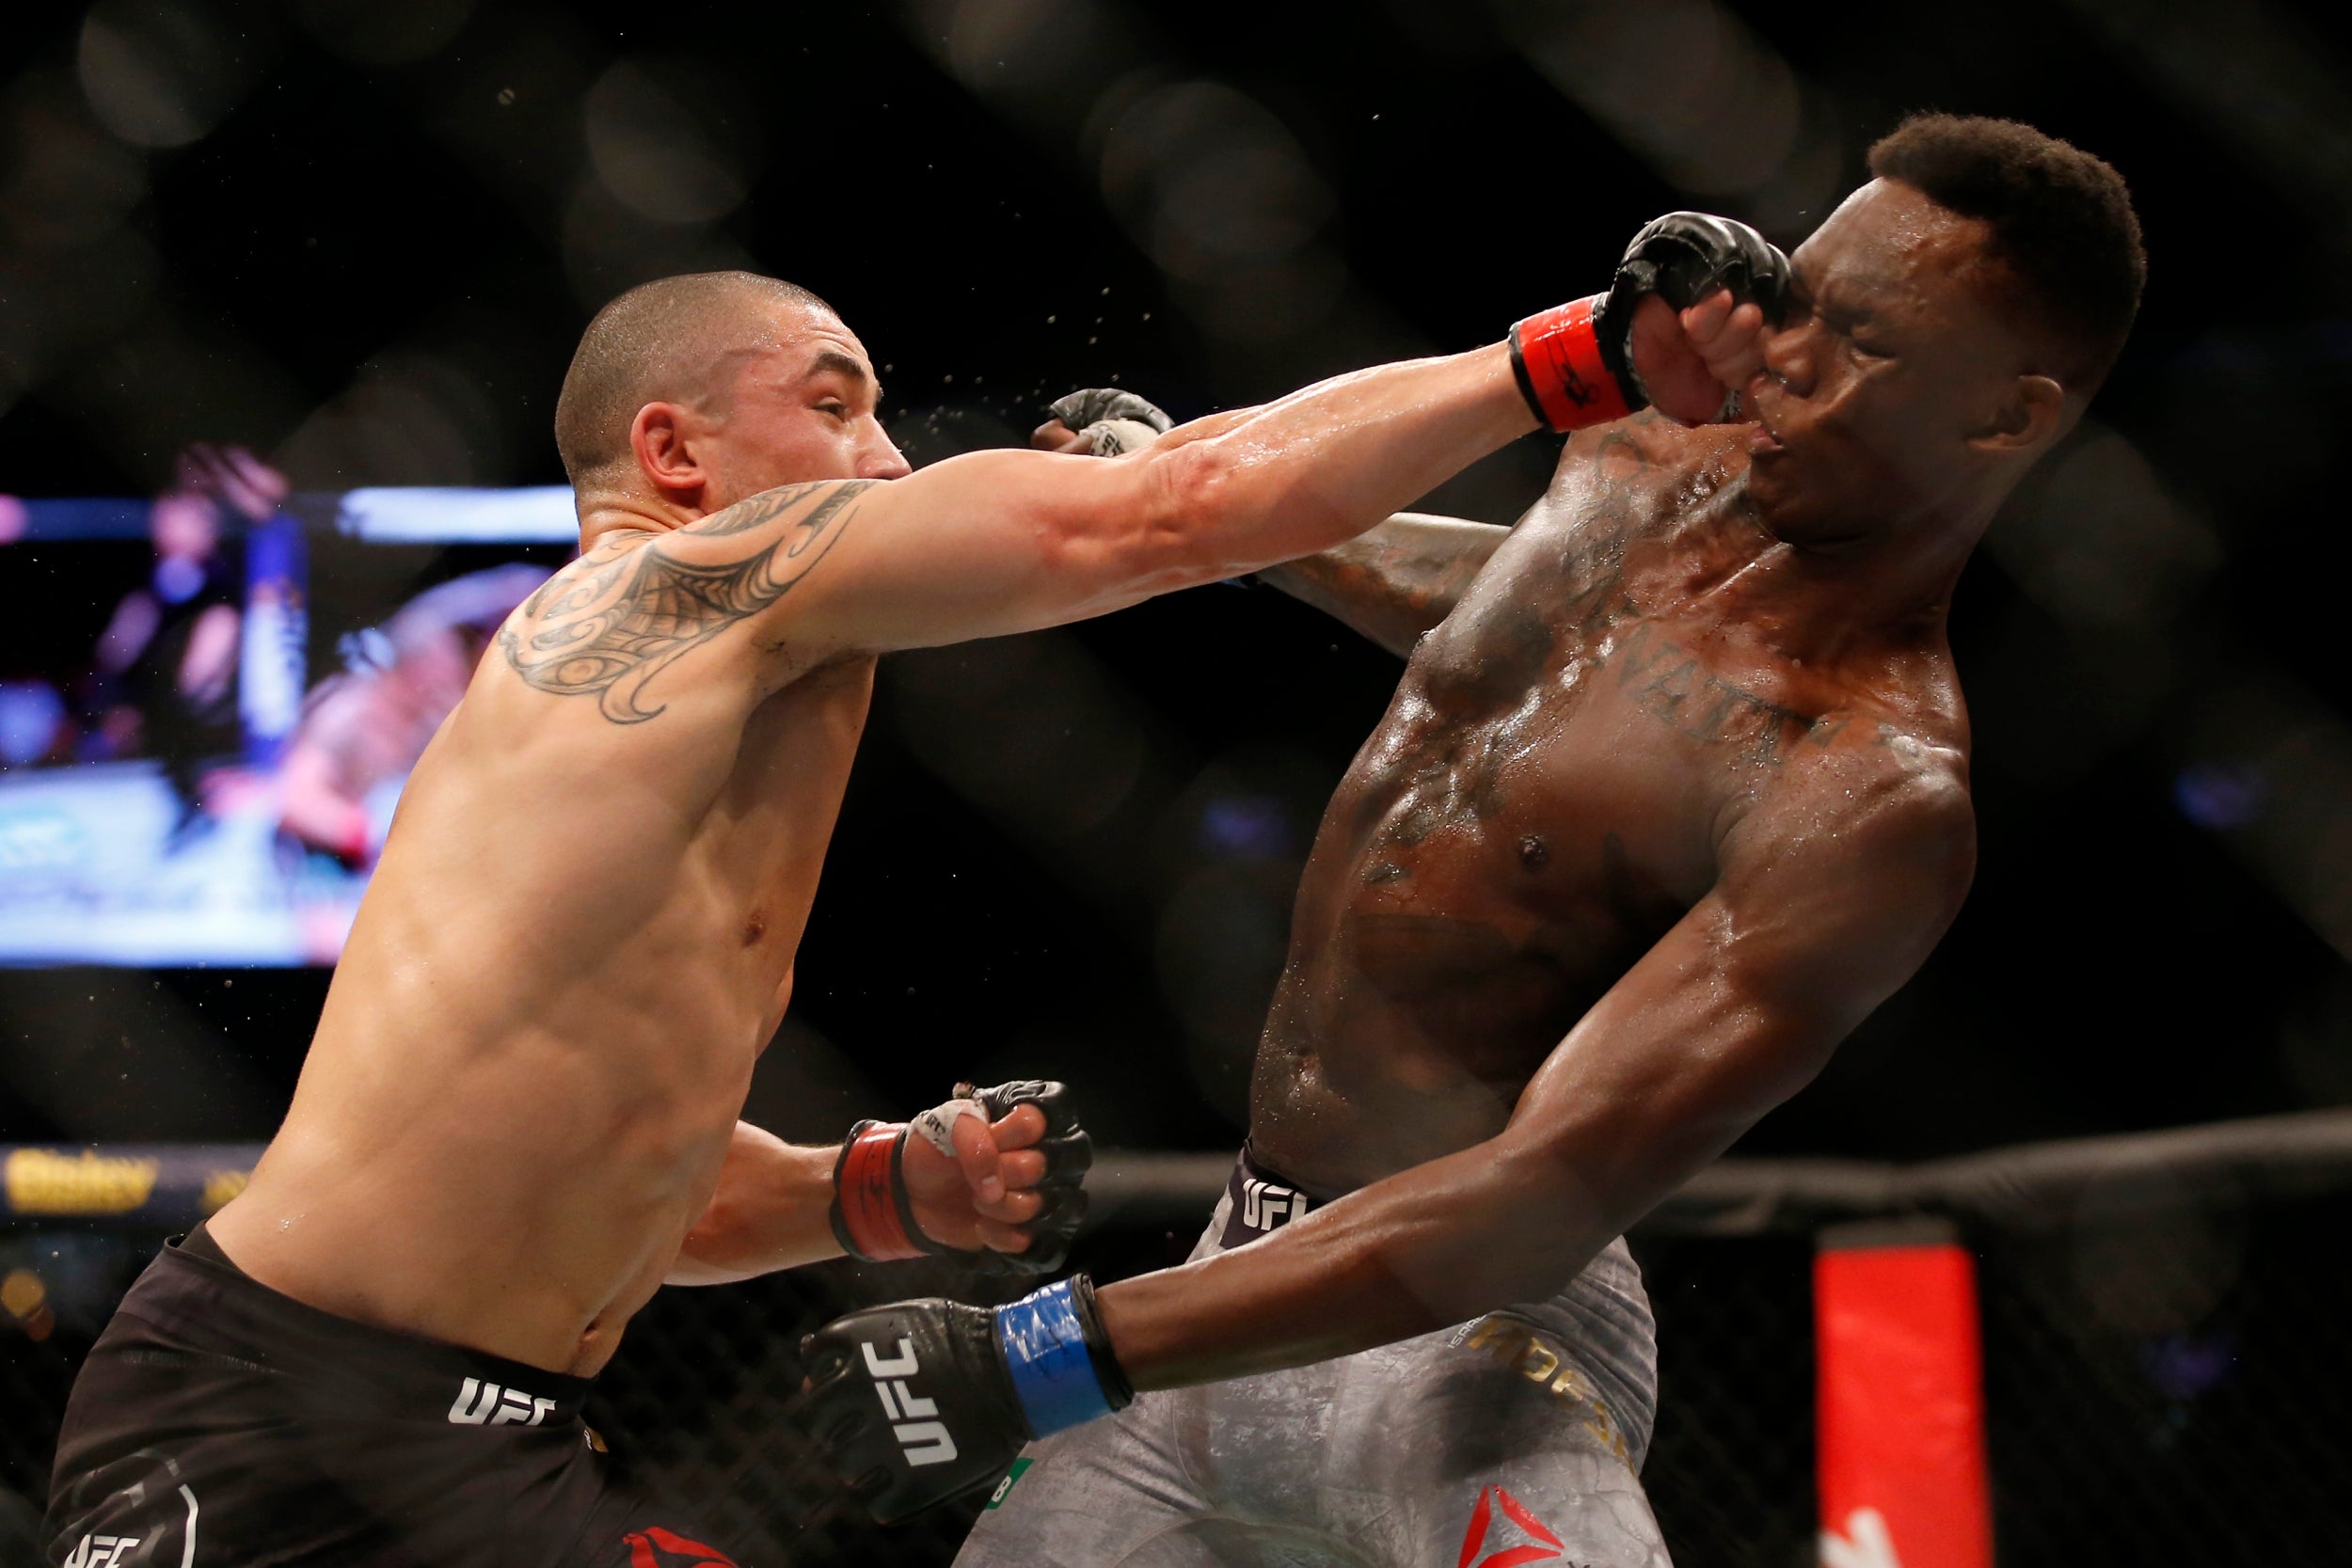 Robert Whittaker (left) is seeking to bounce back after losing his belt to Israel Adesanya